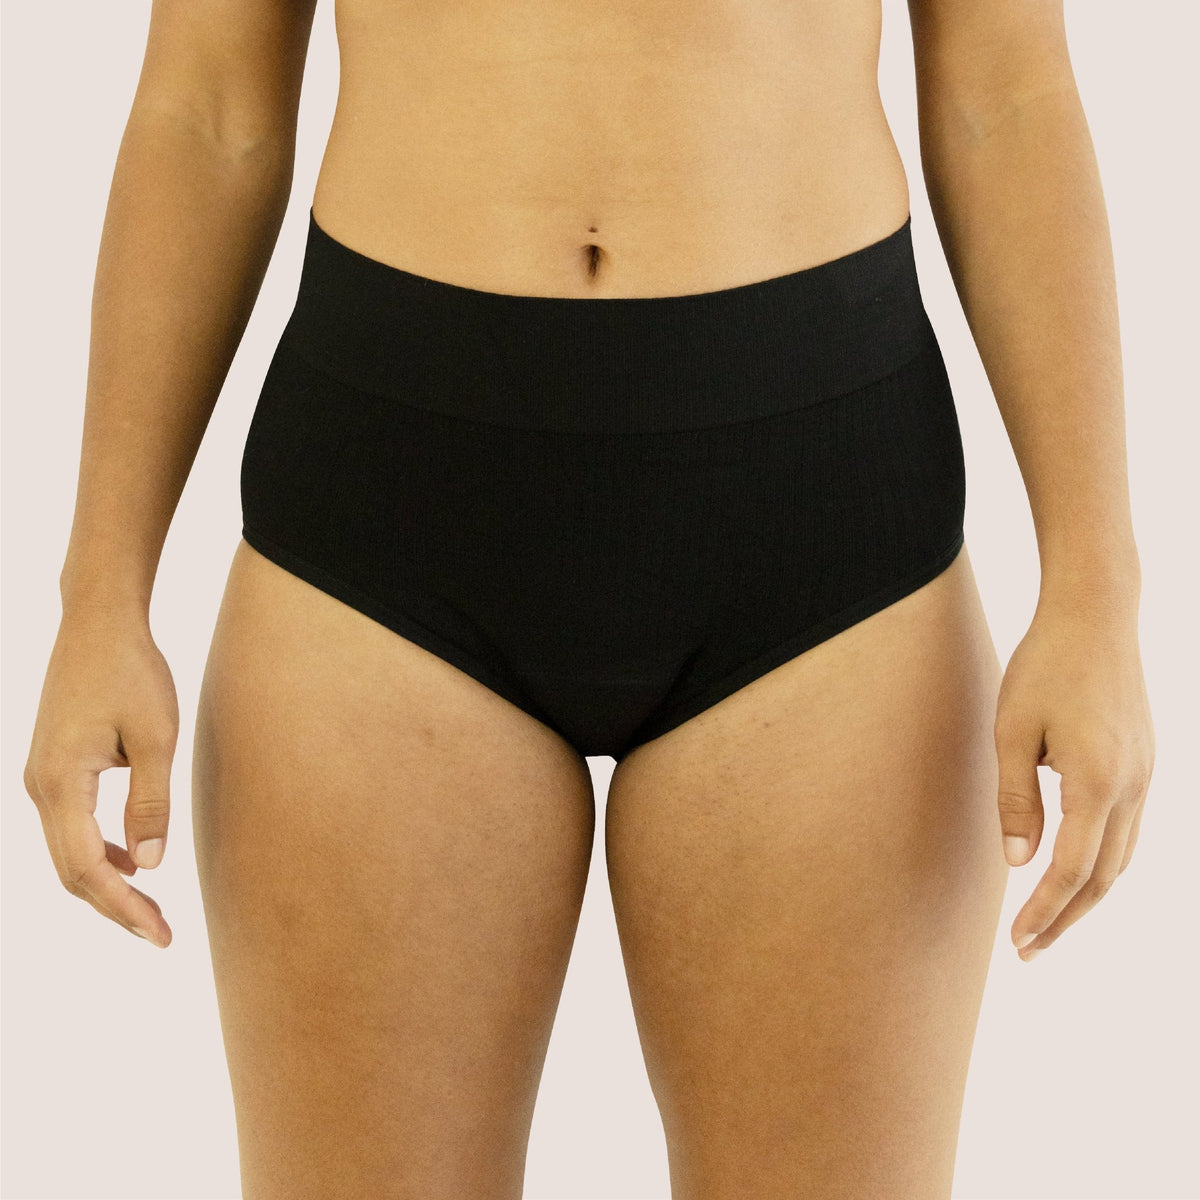 Super Comfy High-waisted Period Underwear - VOXAPOD® soft reusable medical grade silicone fda approved period cup